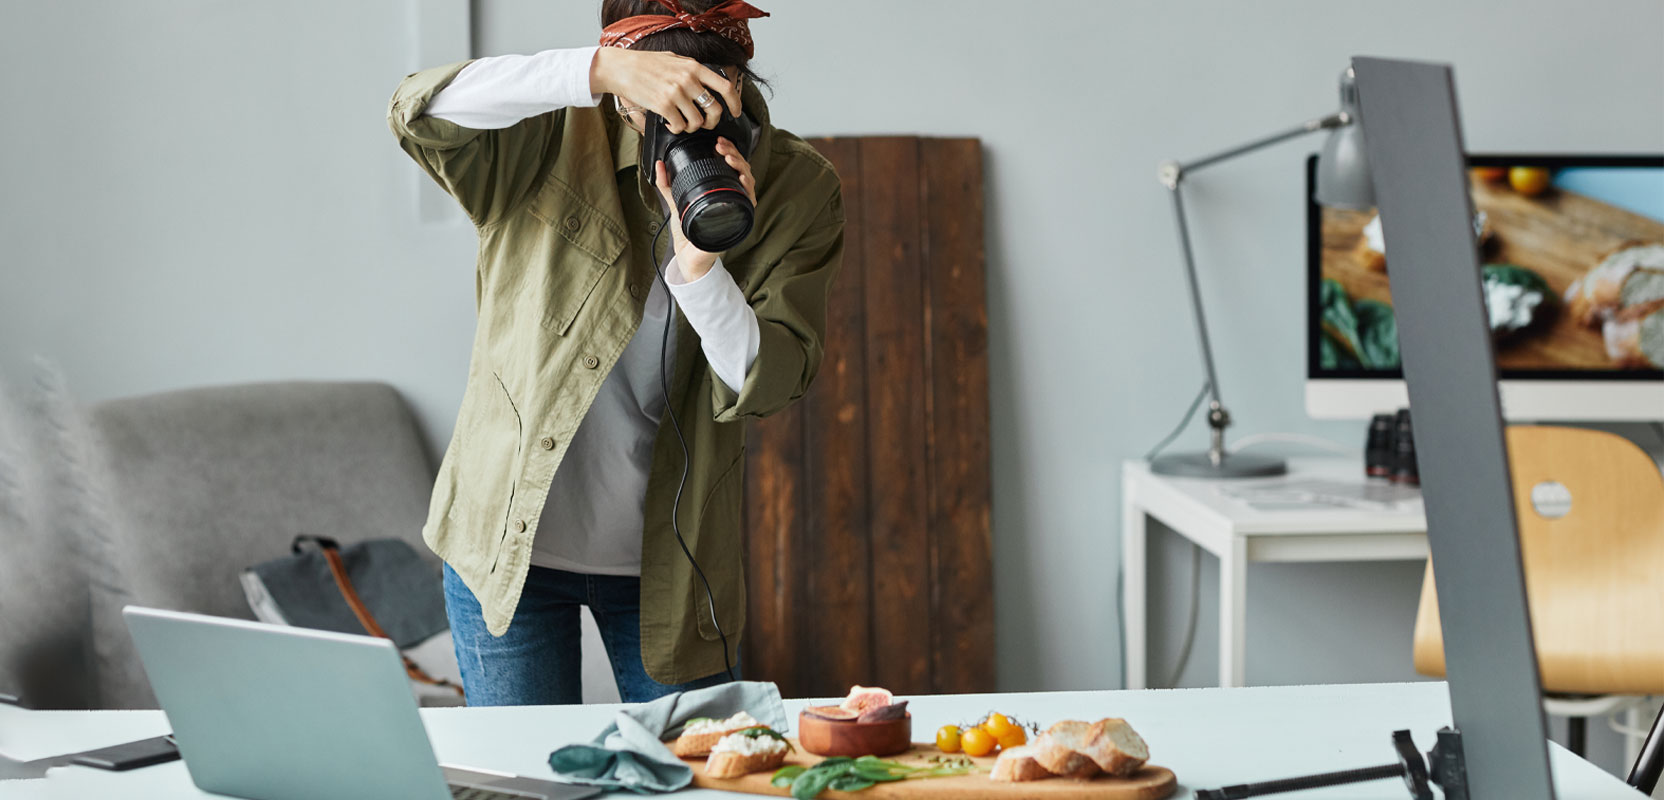 Woman taking a picture of food for her photography side hustle